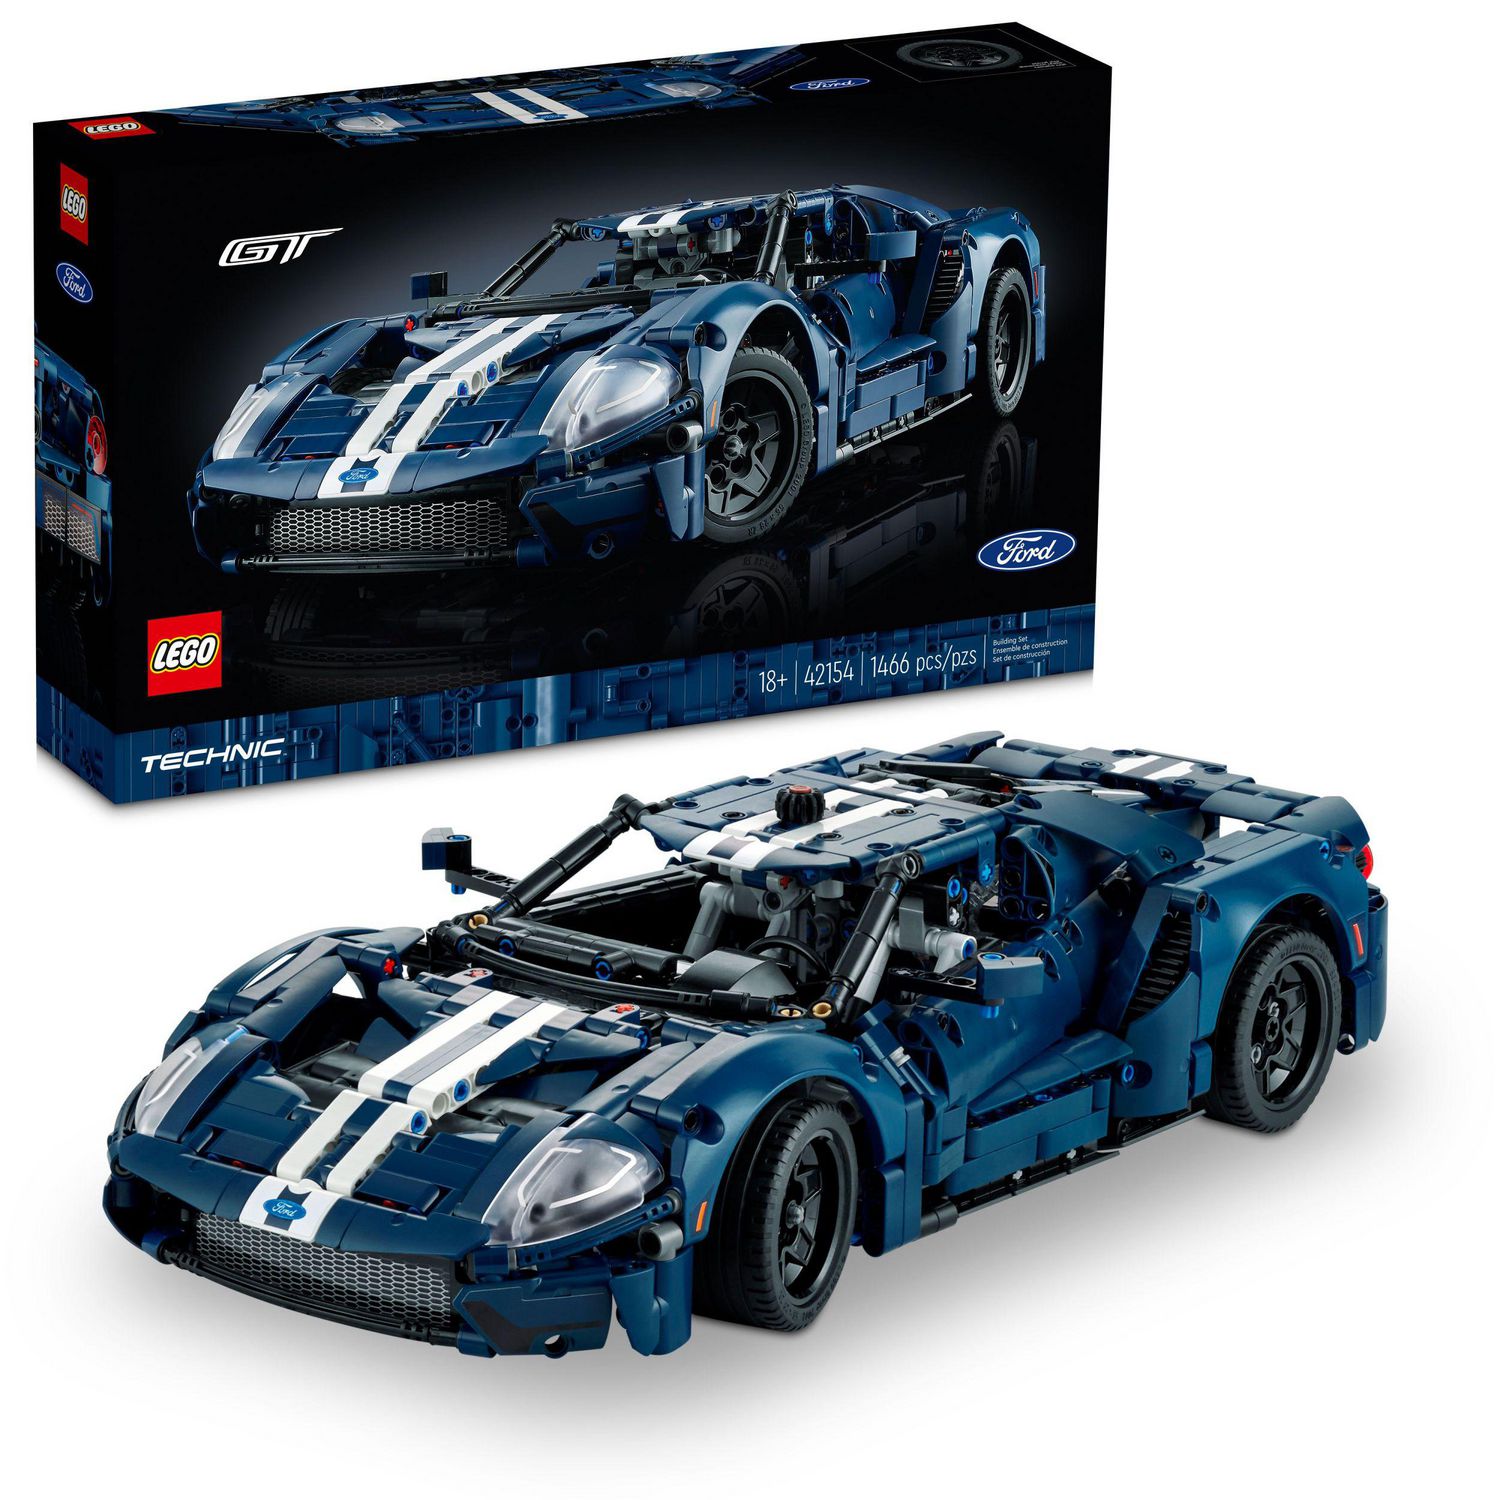 LEGO Technic 2022 Ford GT 42154 Car Model Kit for Adults to Build